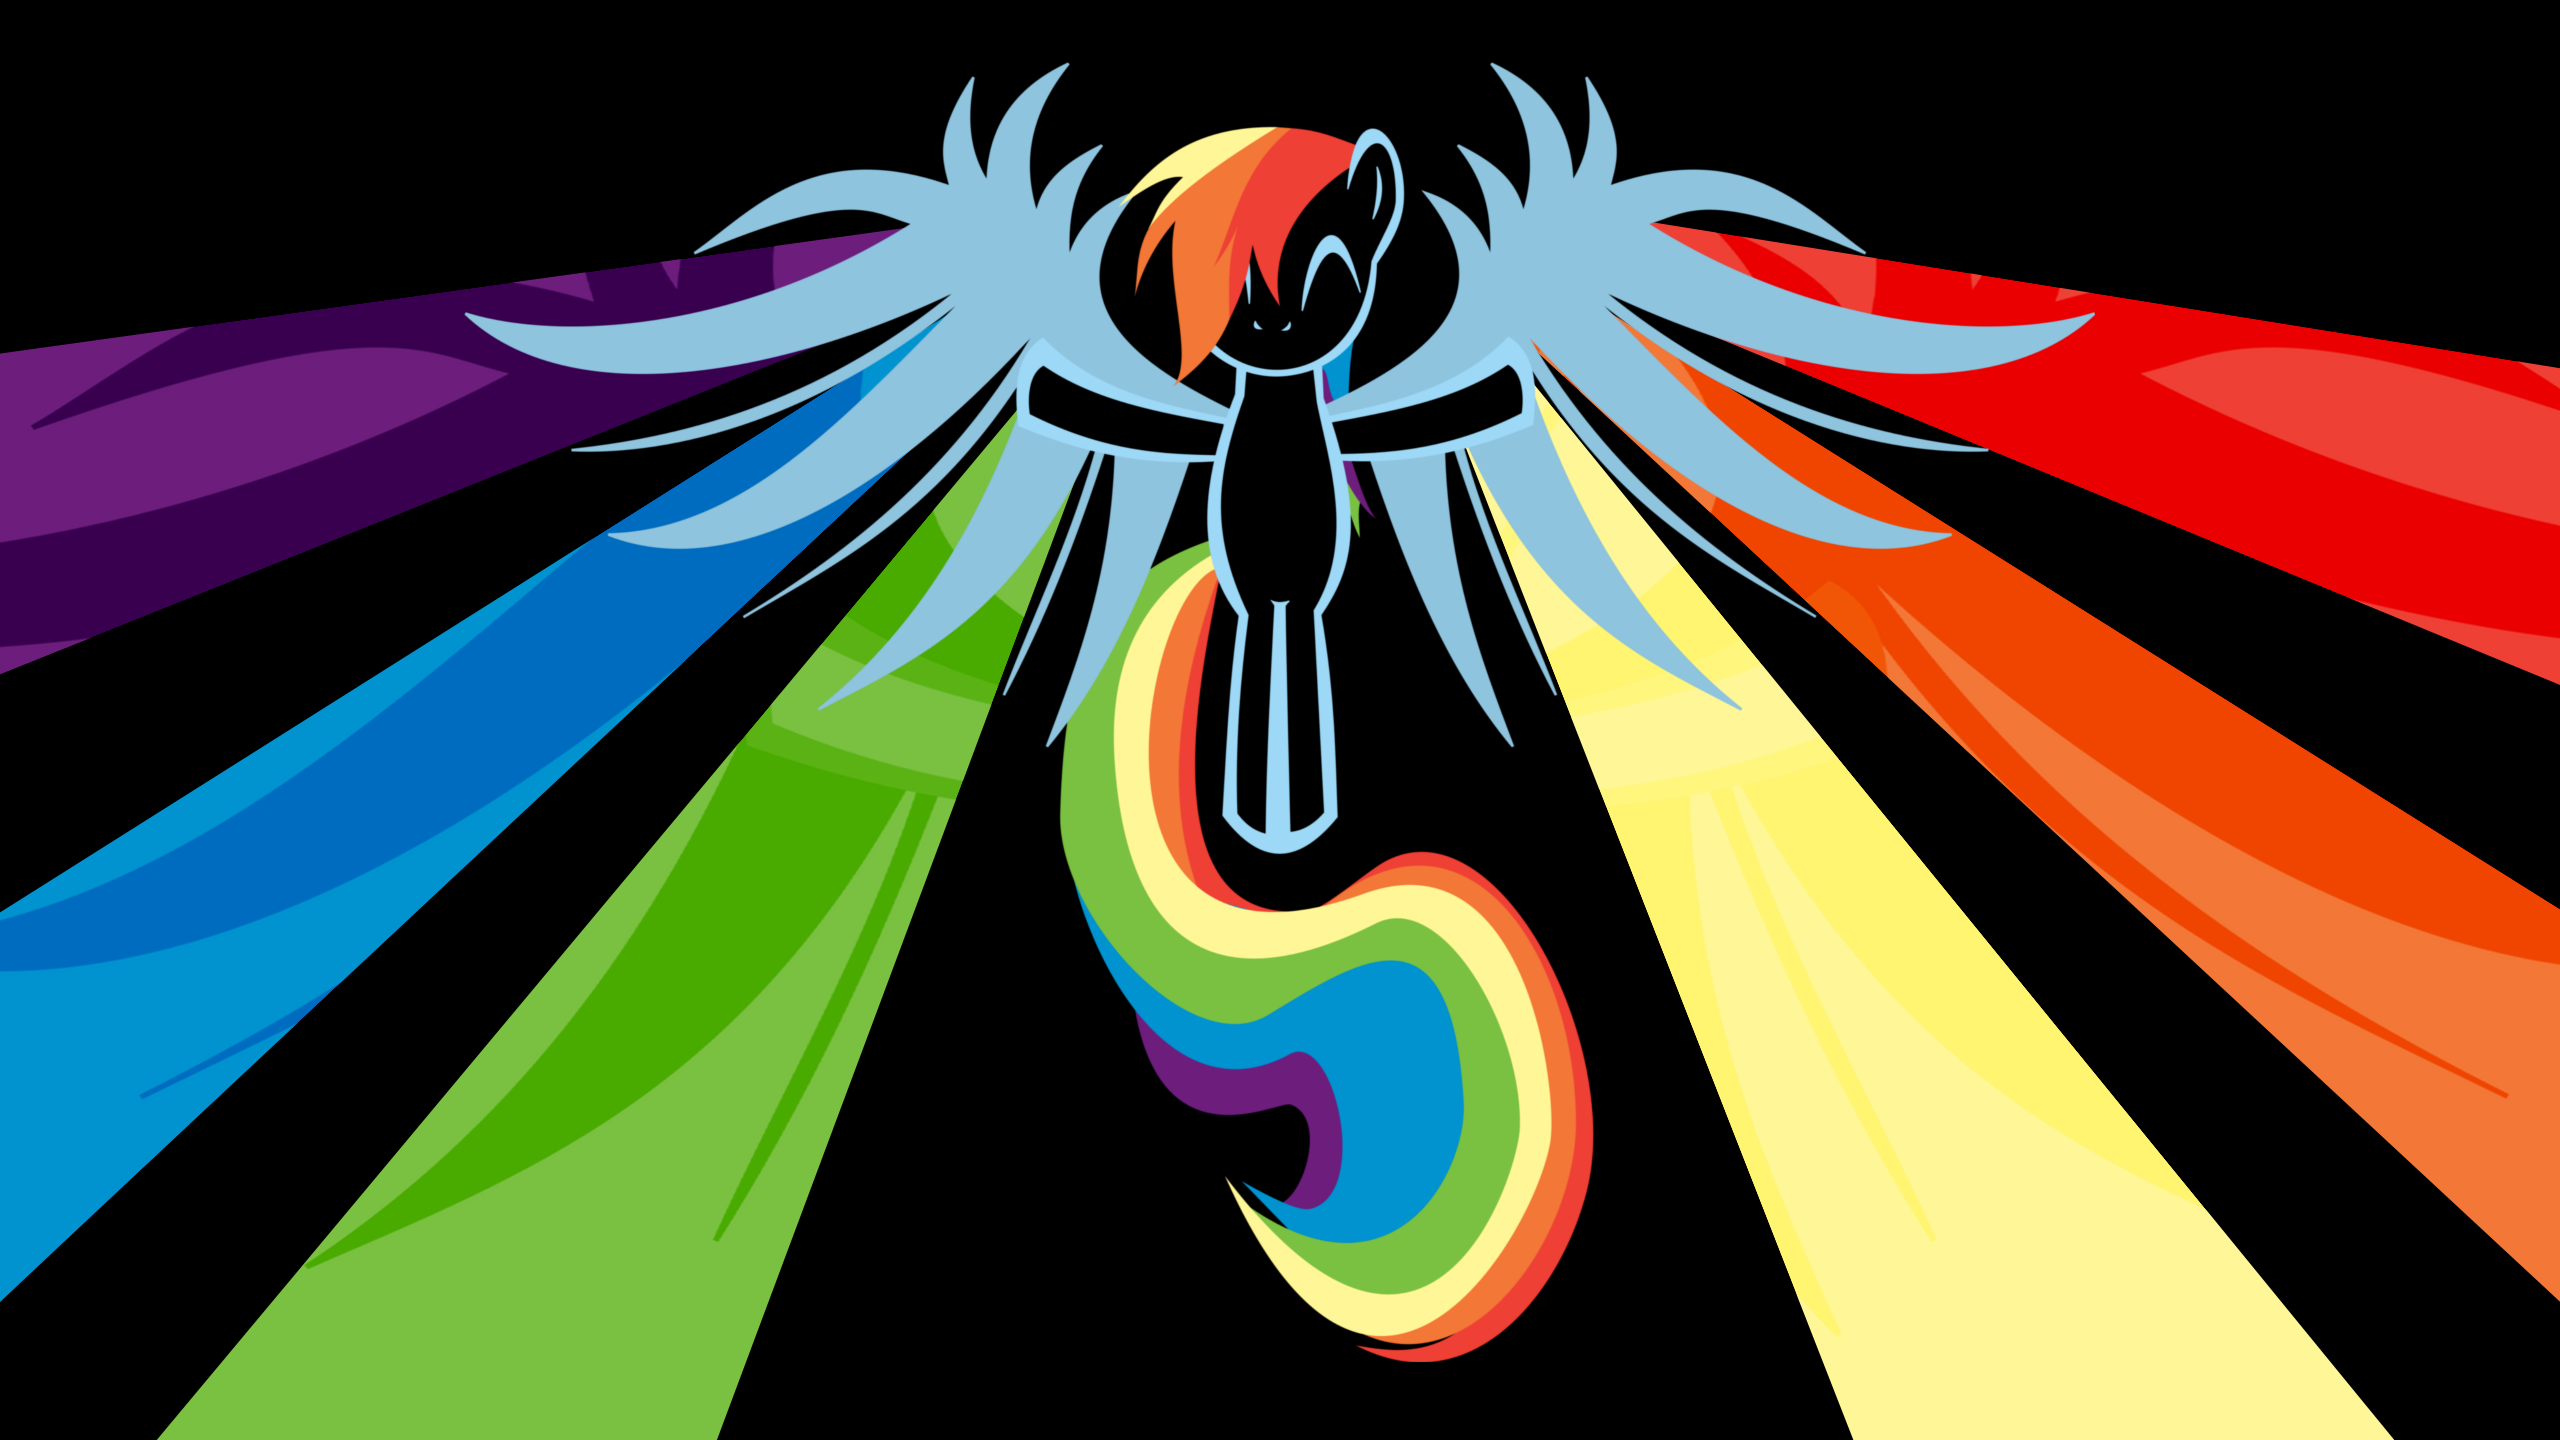 Rainbow Dash Wings Wallpaper 2560x1440 by murknl and UP1TER